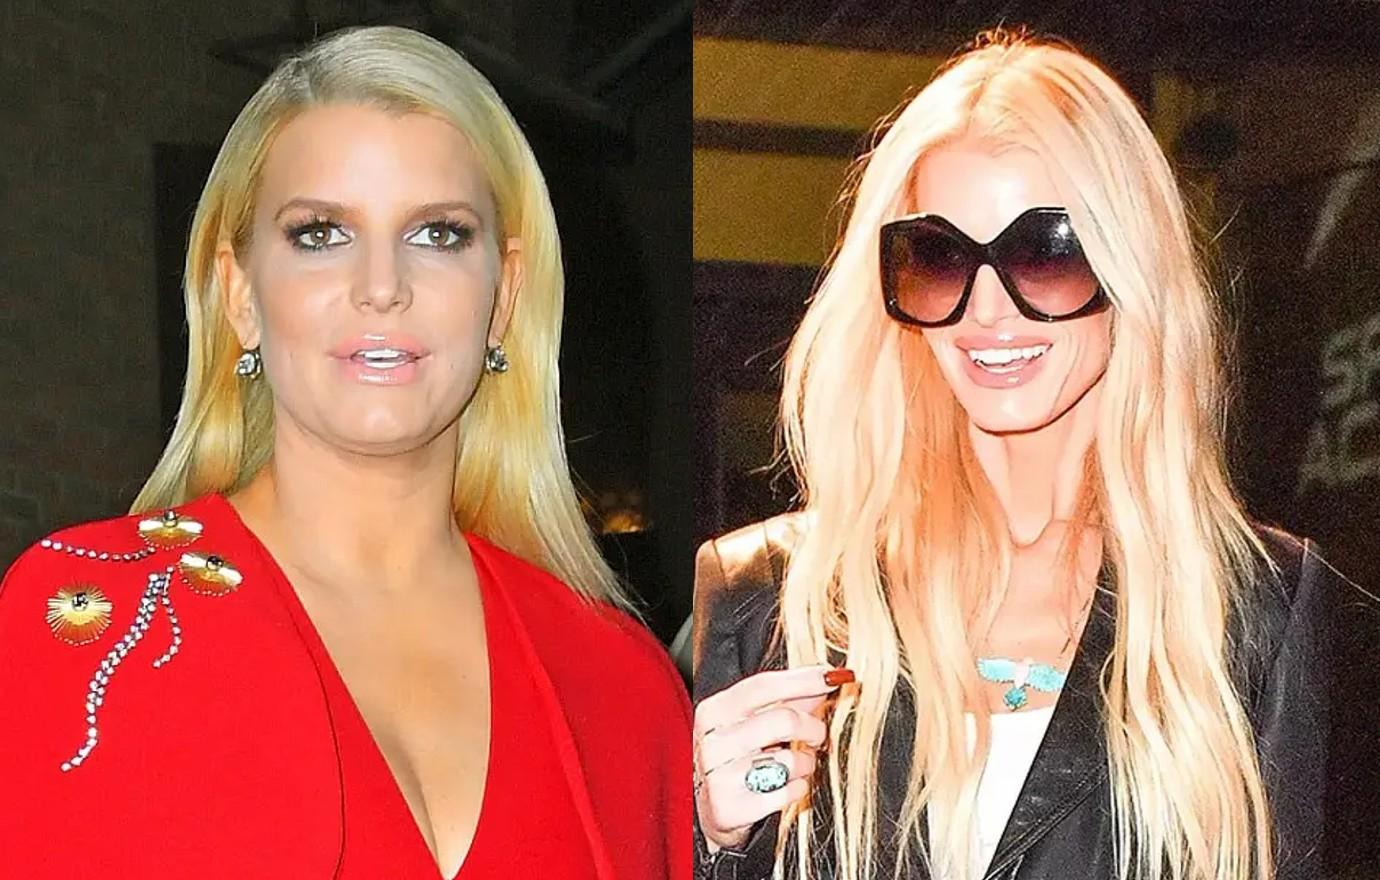 Jessica Simpson's Friends Concerned Over Singer's Drastic Weight Loss